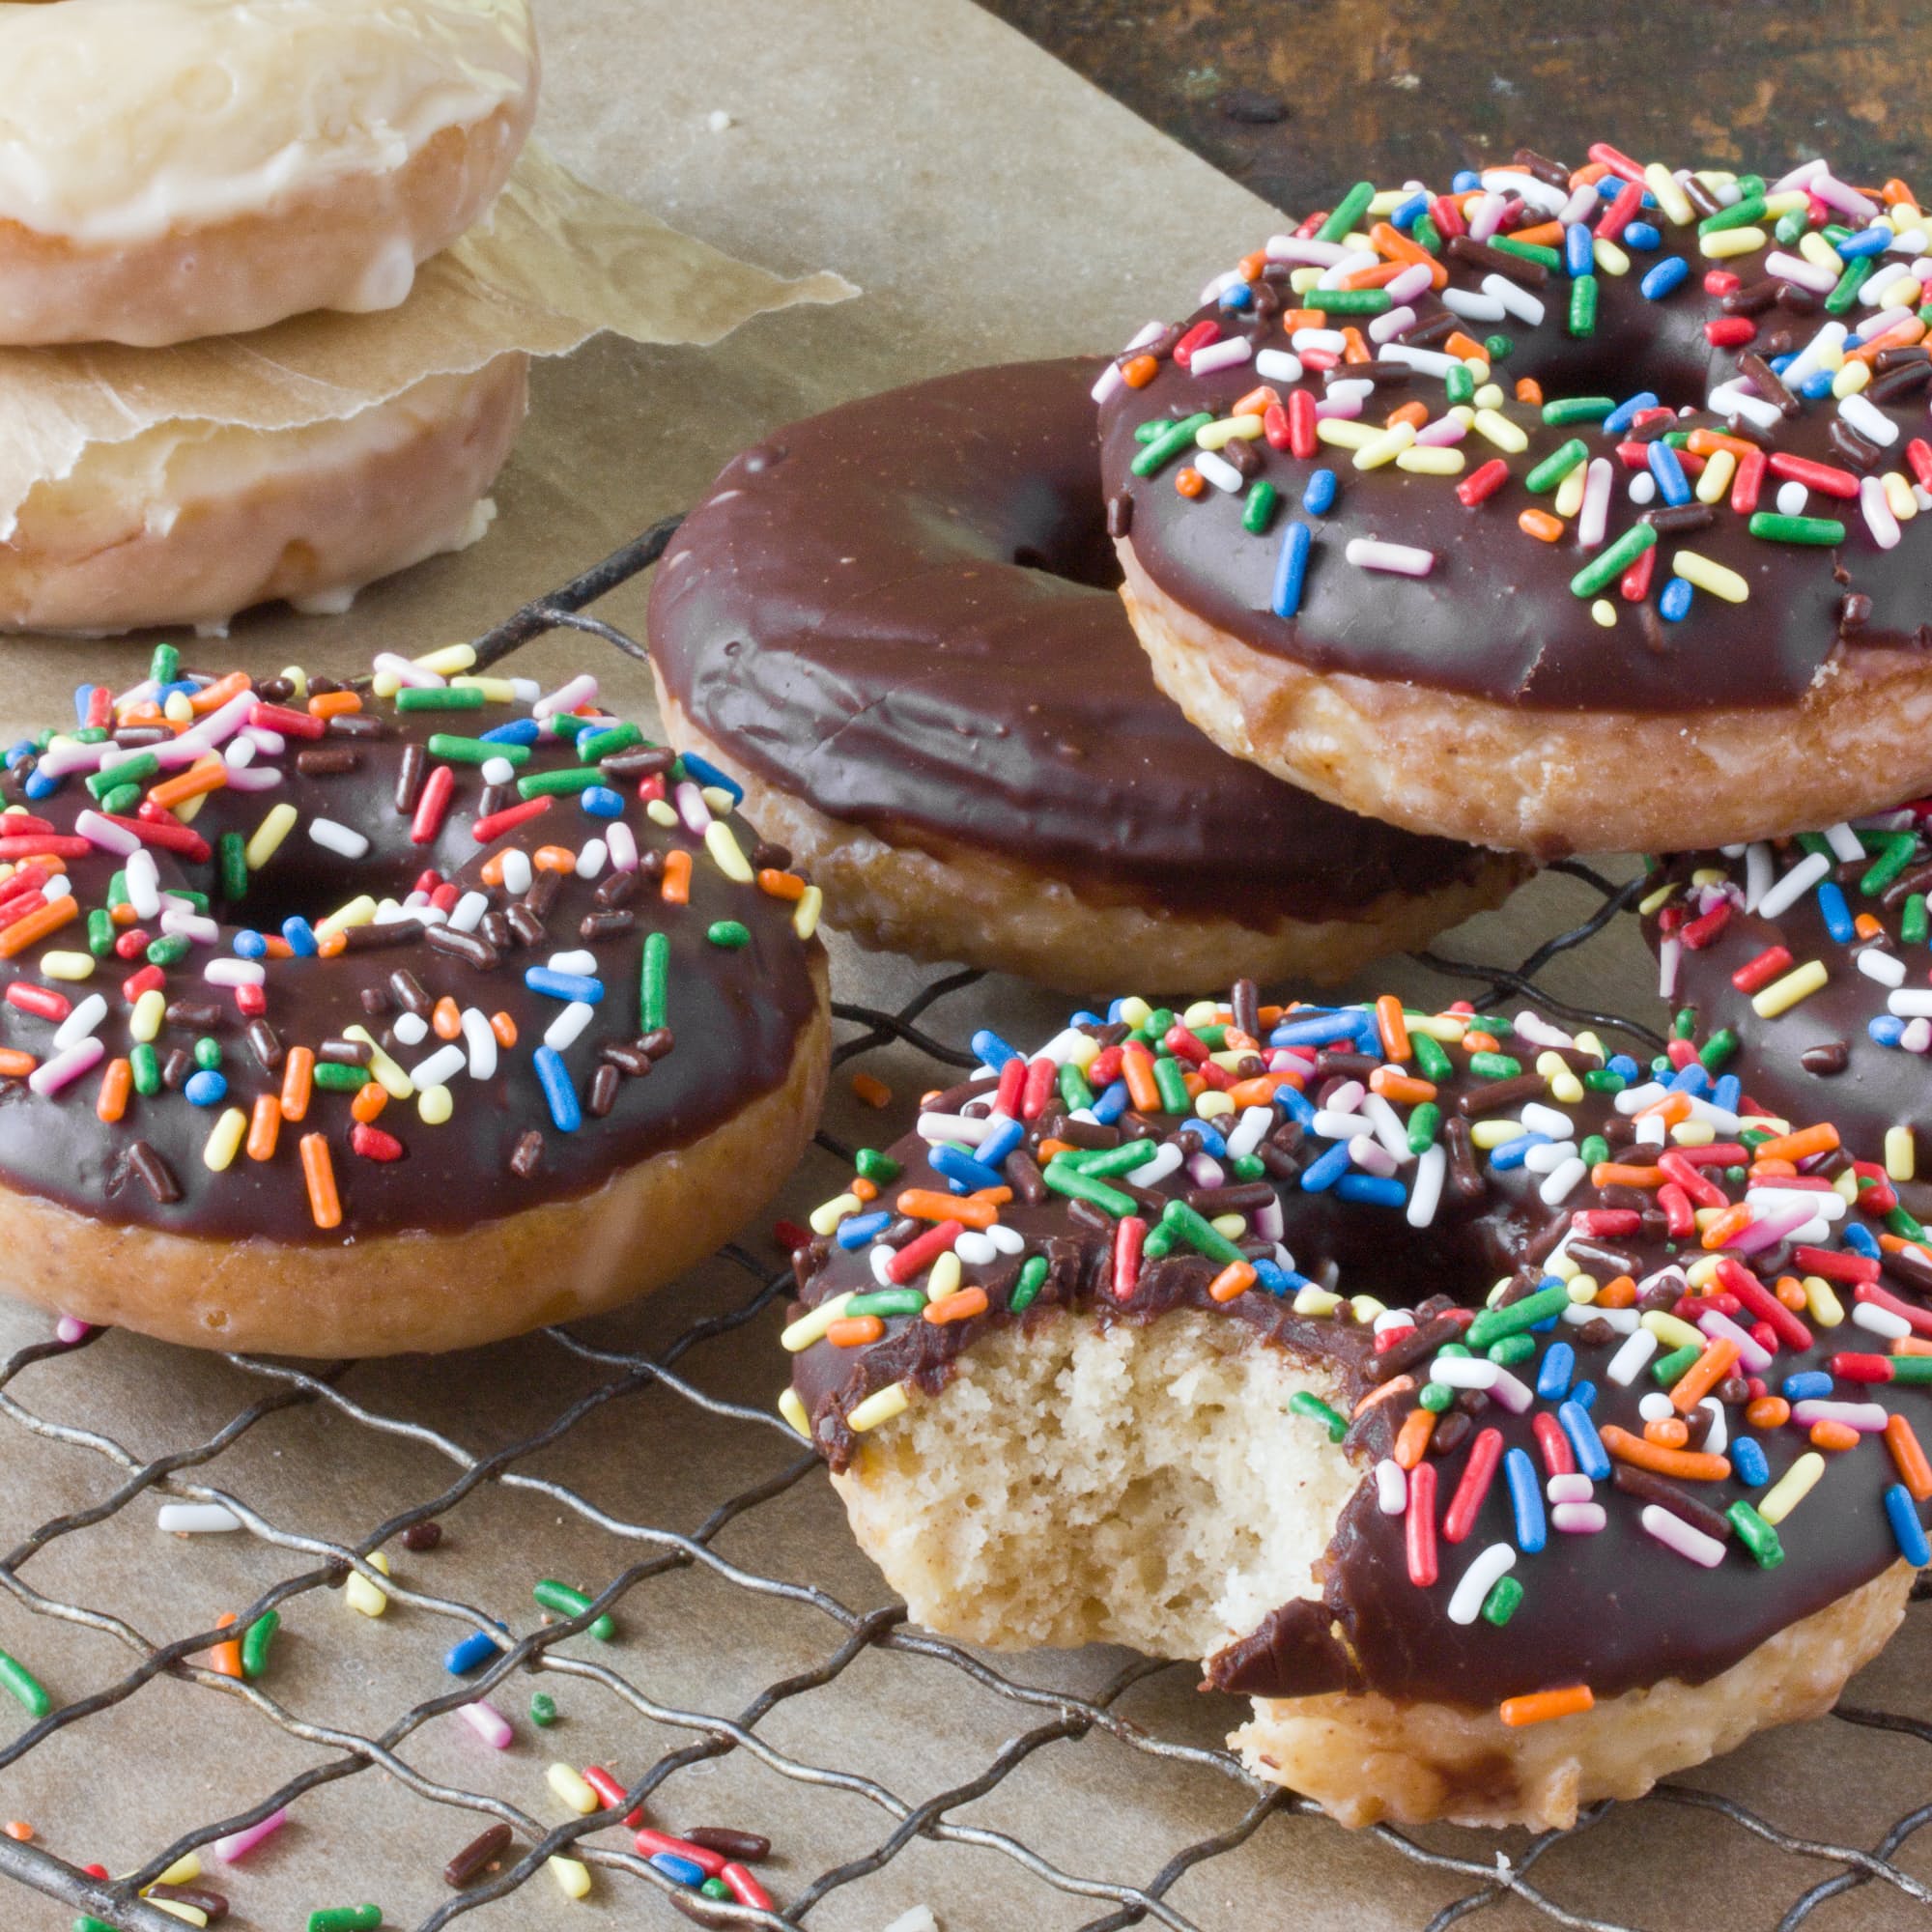 Chocolate-Glazed Baked Doughnuts with Sprinkles